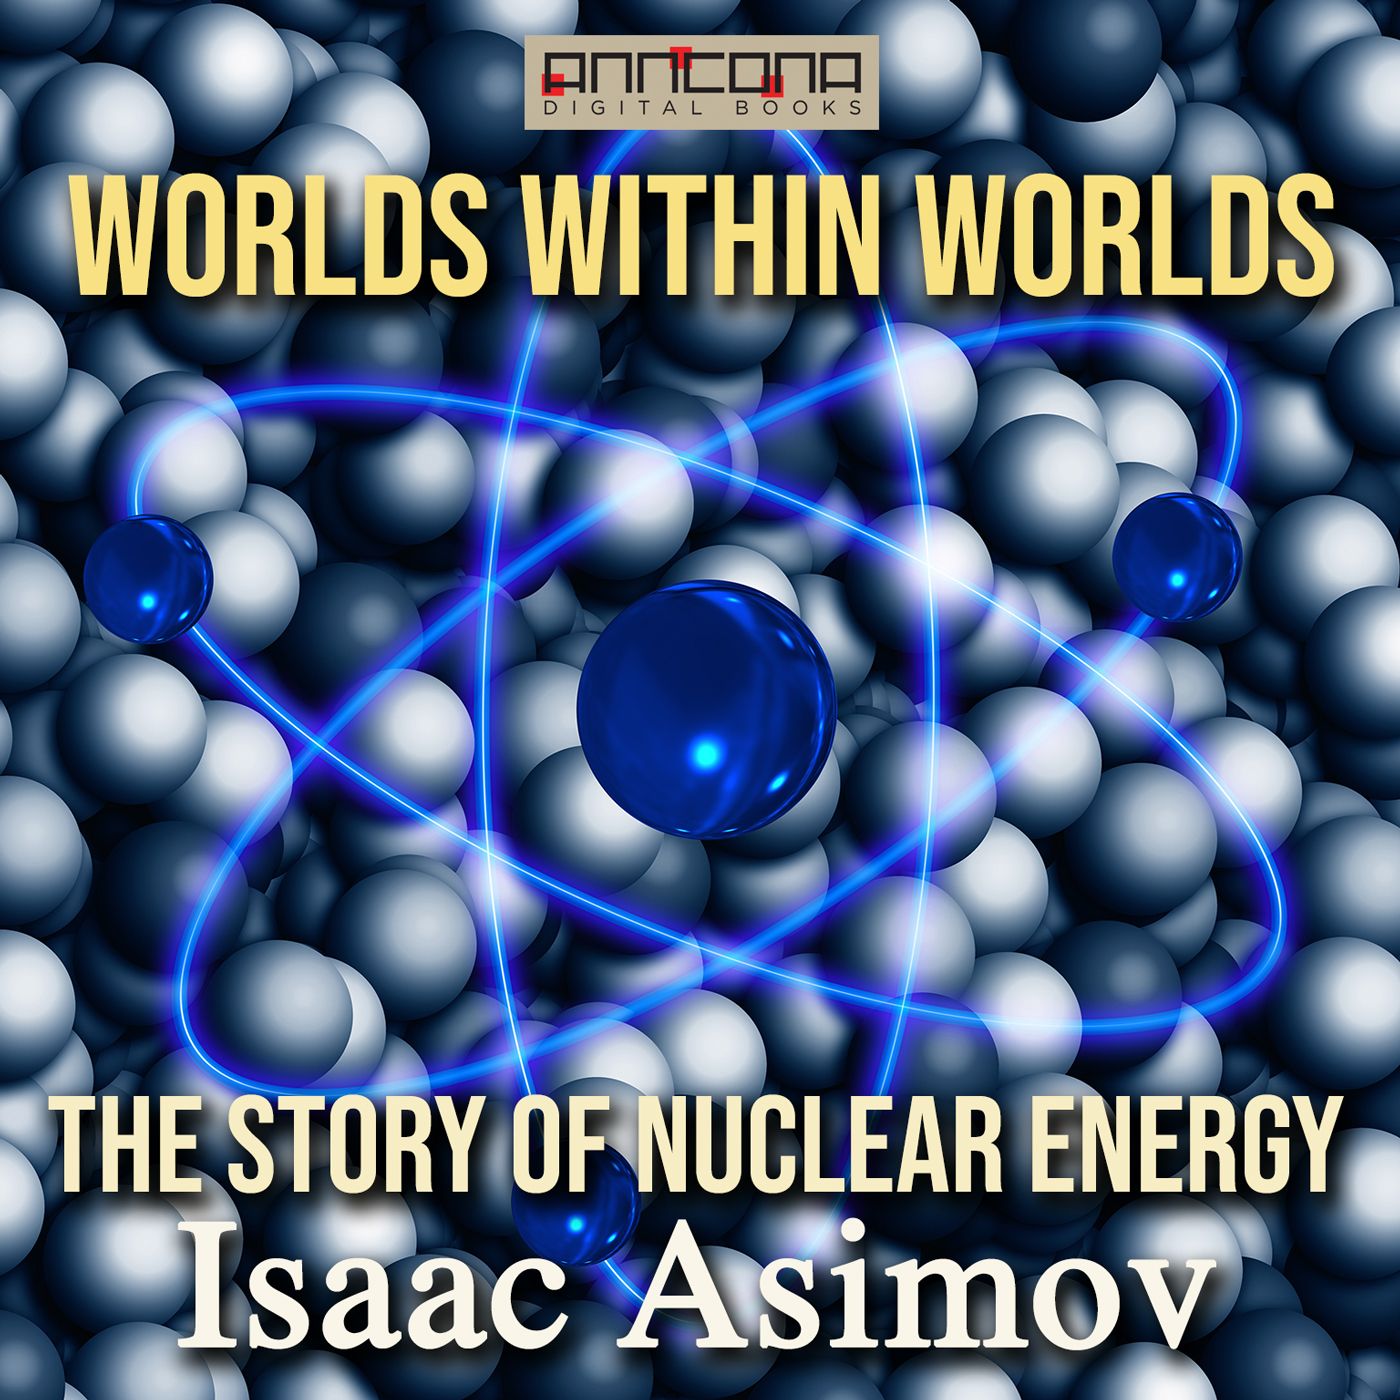 Worlds Within Worlds - The Story of Nuclear Energy, ljudbok av Isaac Asimov